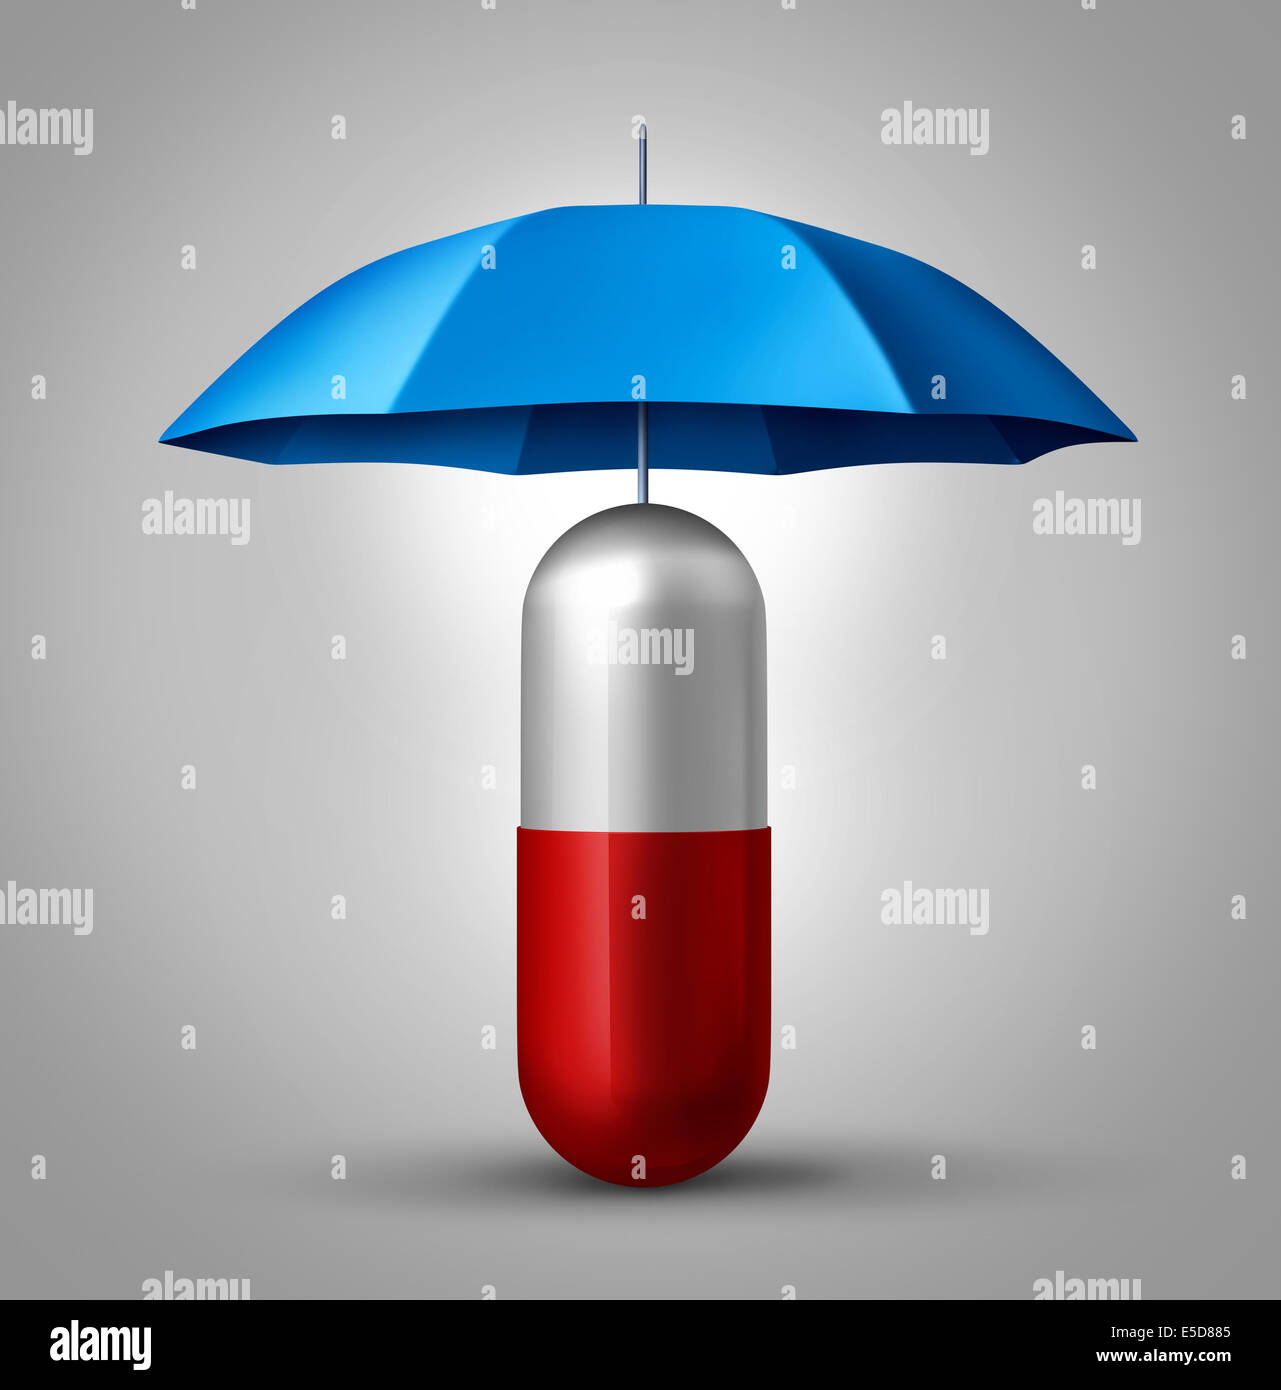 Medicine protection and drug safety concept as a health care symbol with a capsule pill with an umbrella protecting the pharmaceutical icon. Stock Photo